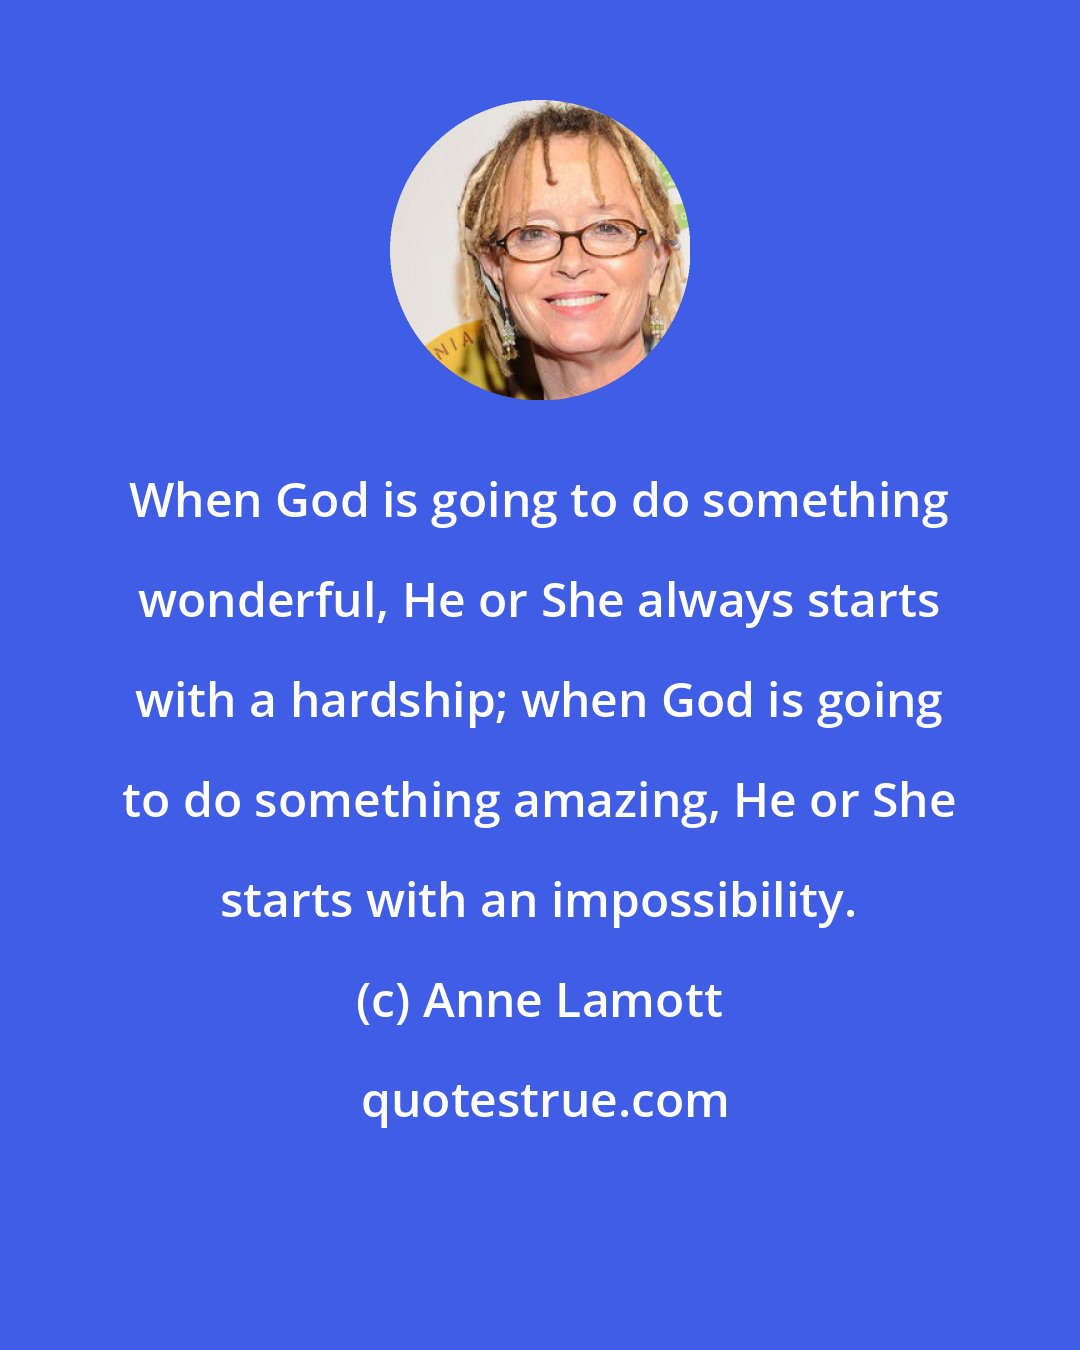 Anne Lamott: When God is going to do something wonderful, He or She always starts with a hardship; when God is going to do something amazing, He or She starts with an impossibility.